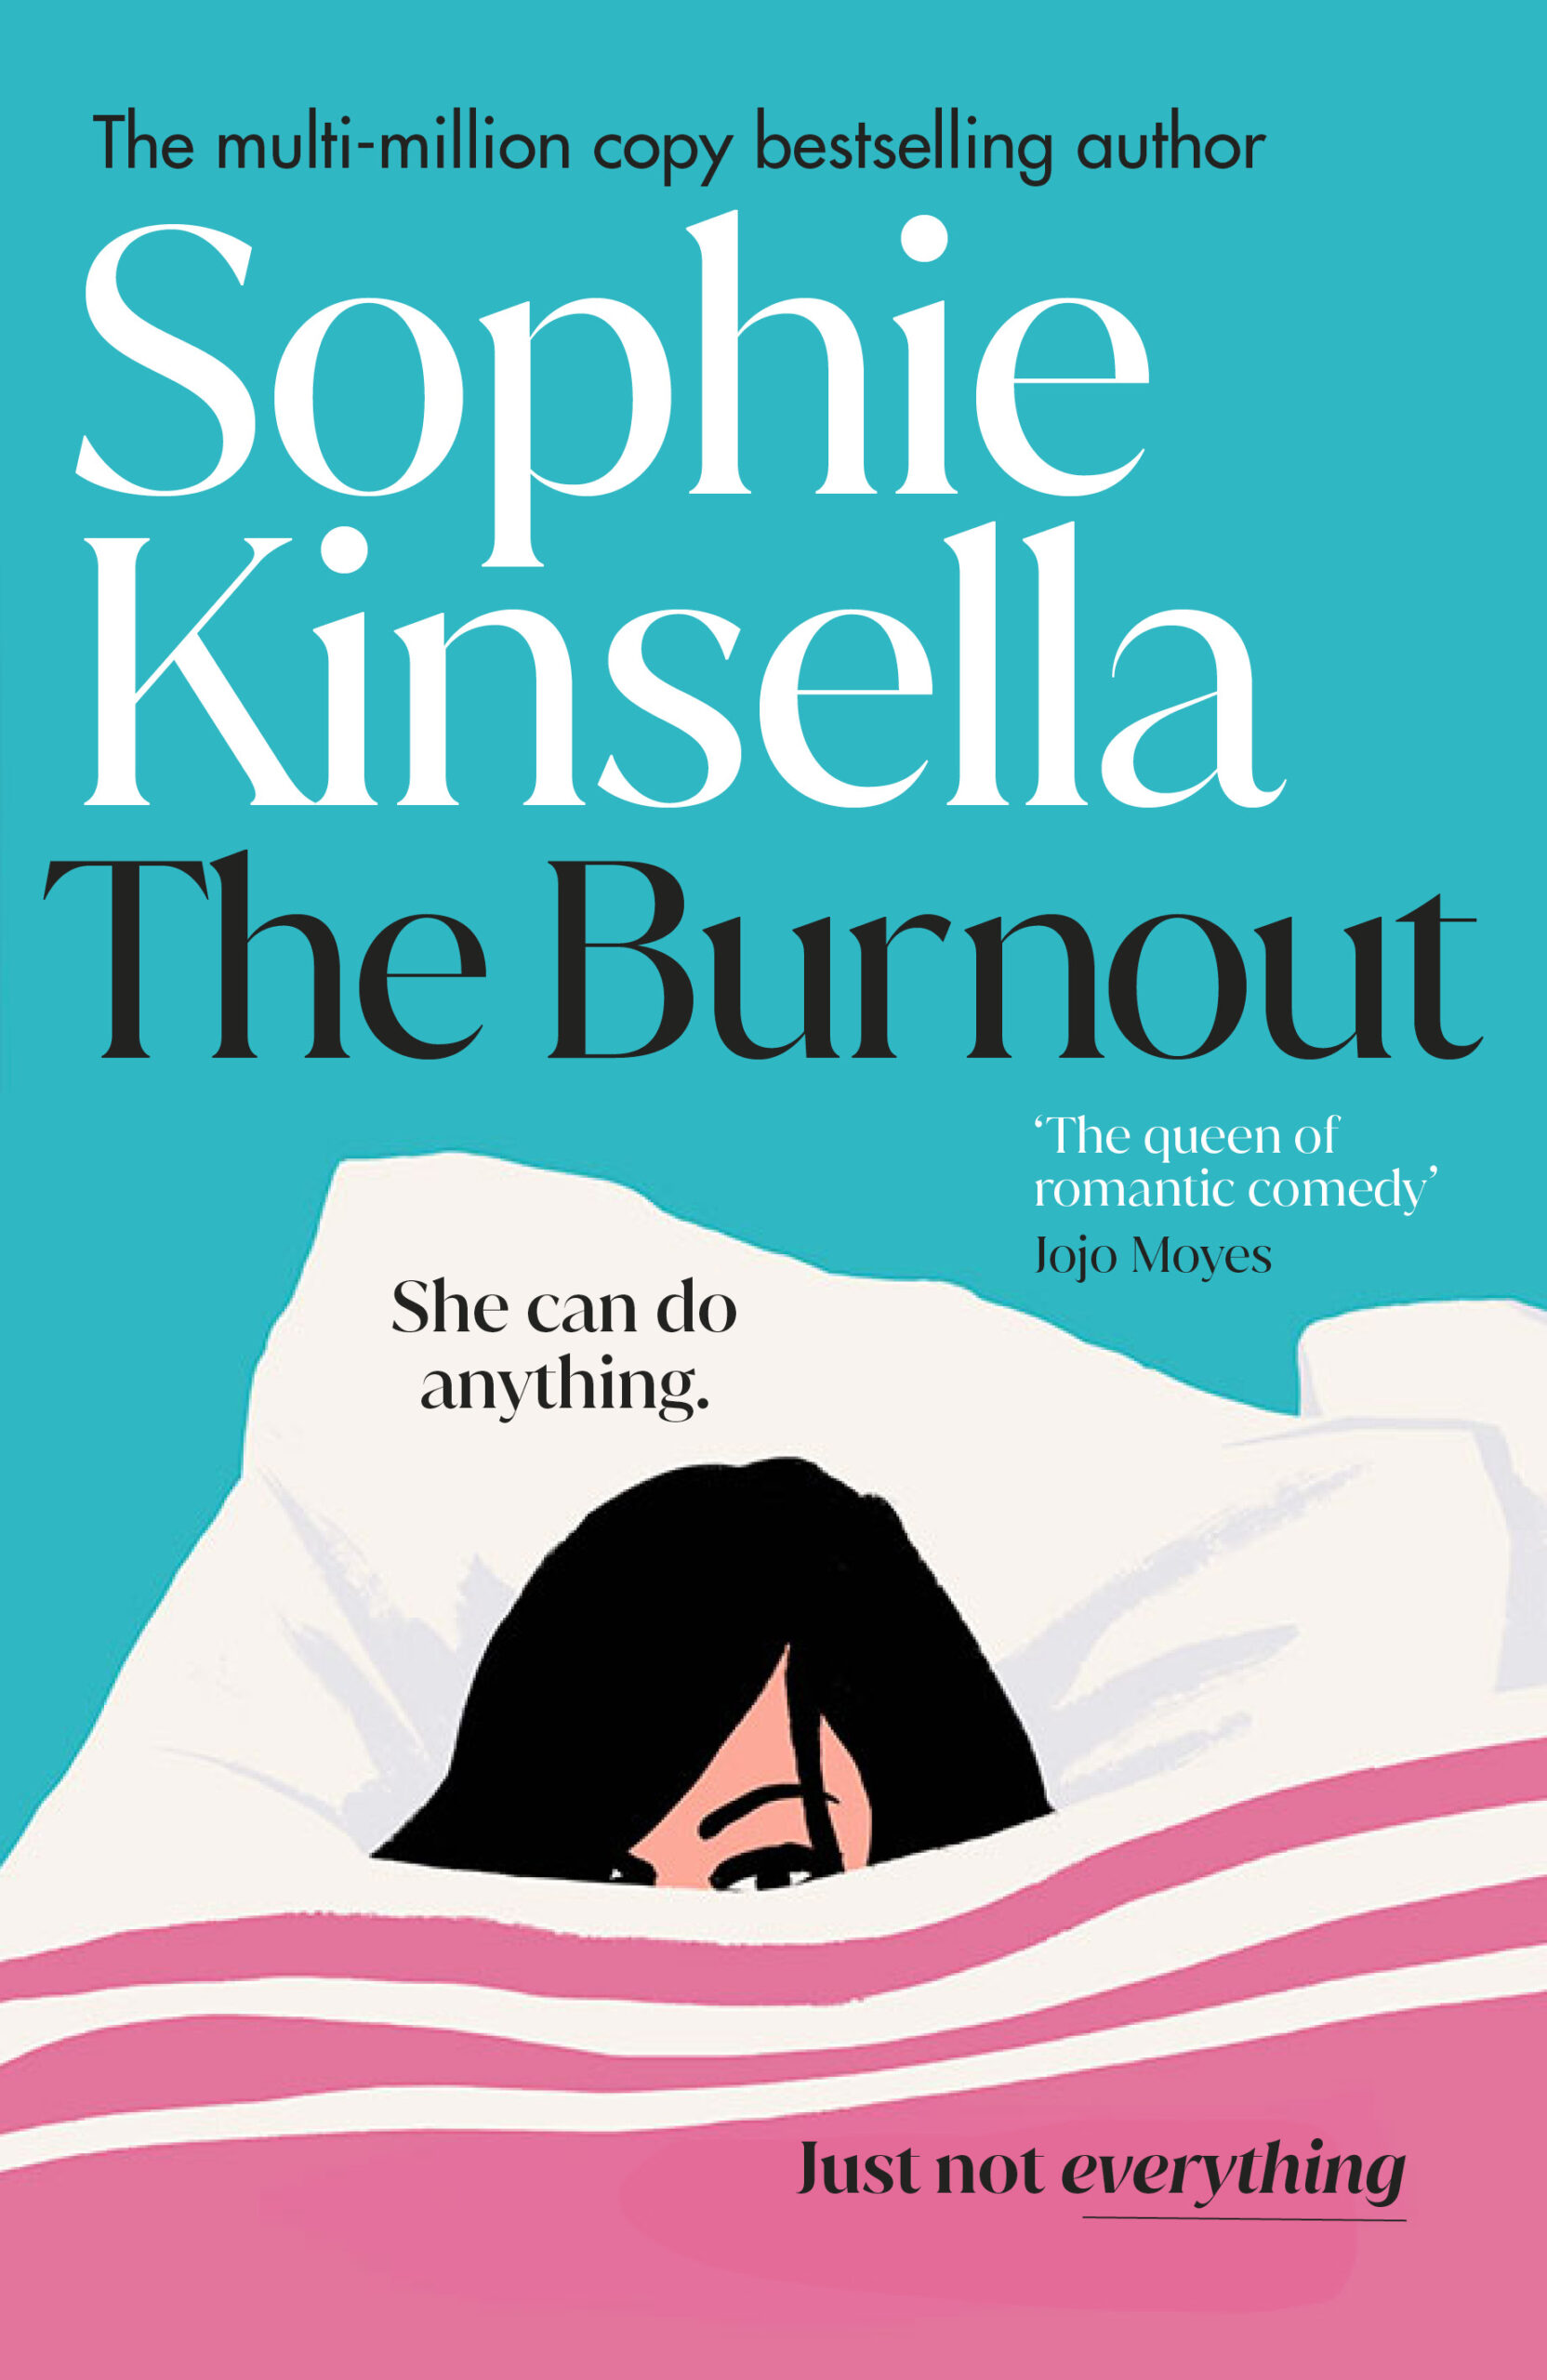 “The Burnout” is one of many relatable novels that tackle the challenge behind coping with the draining demands of working